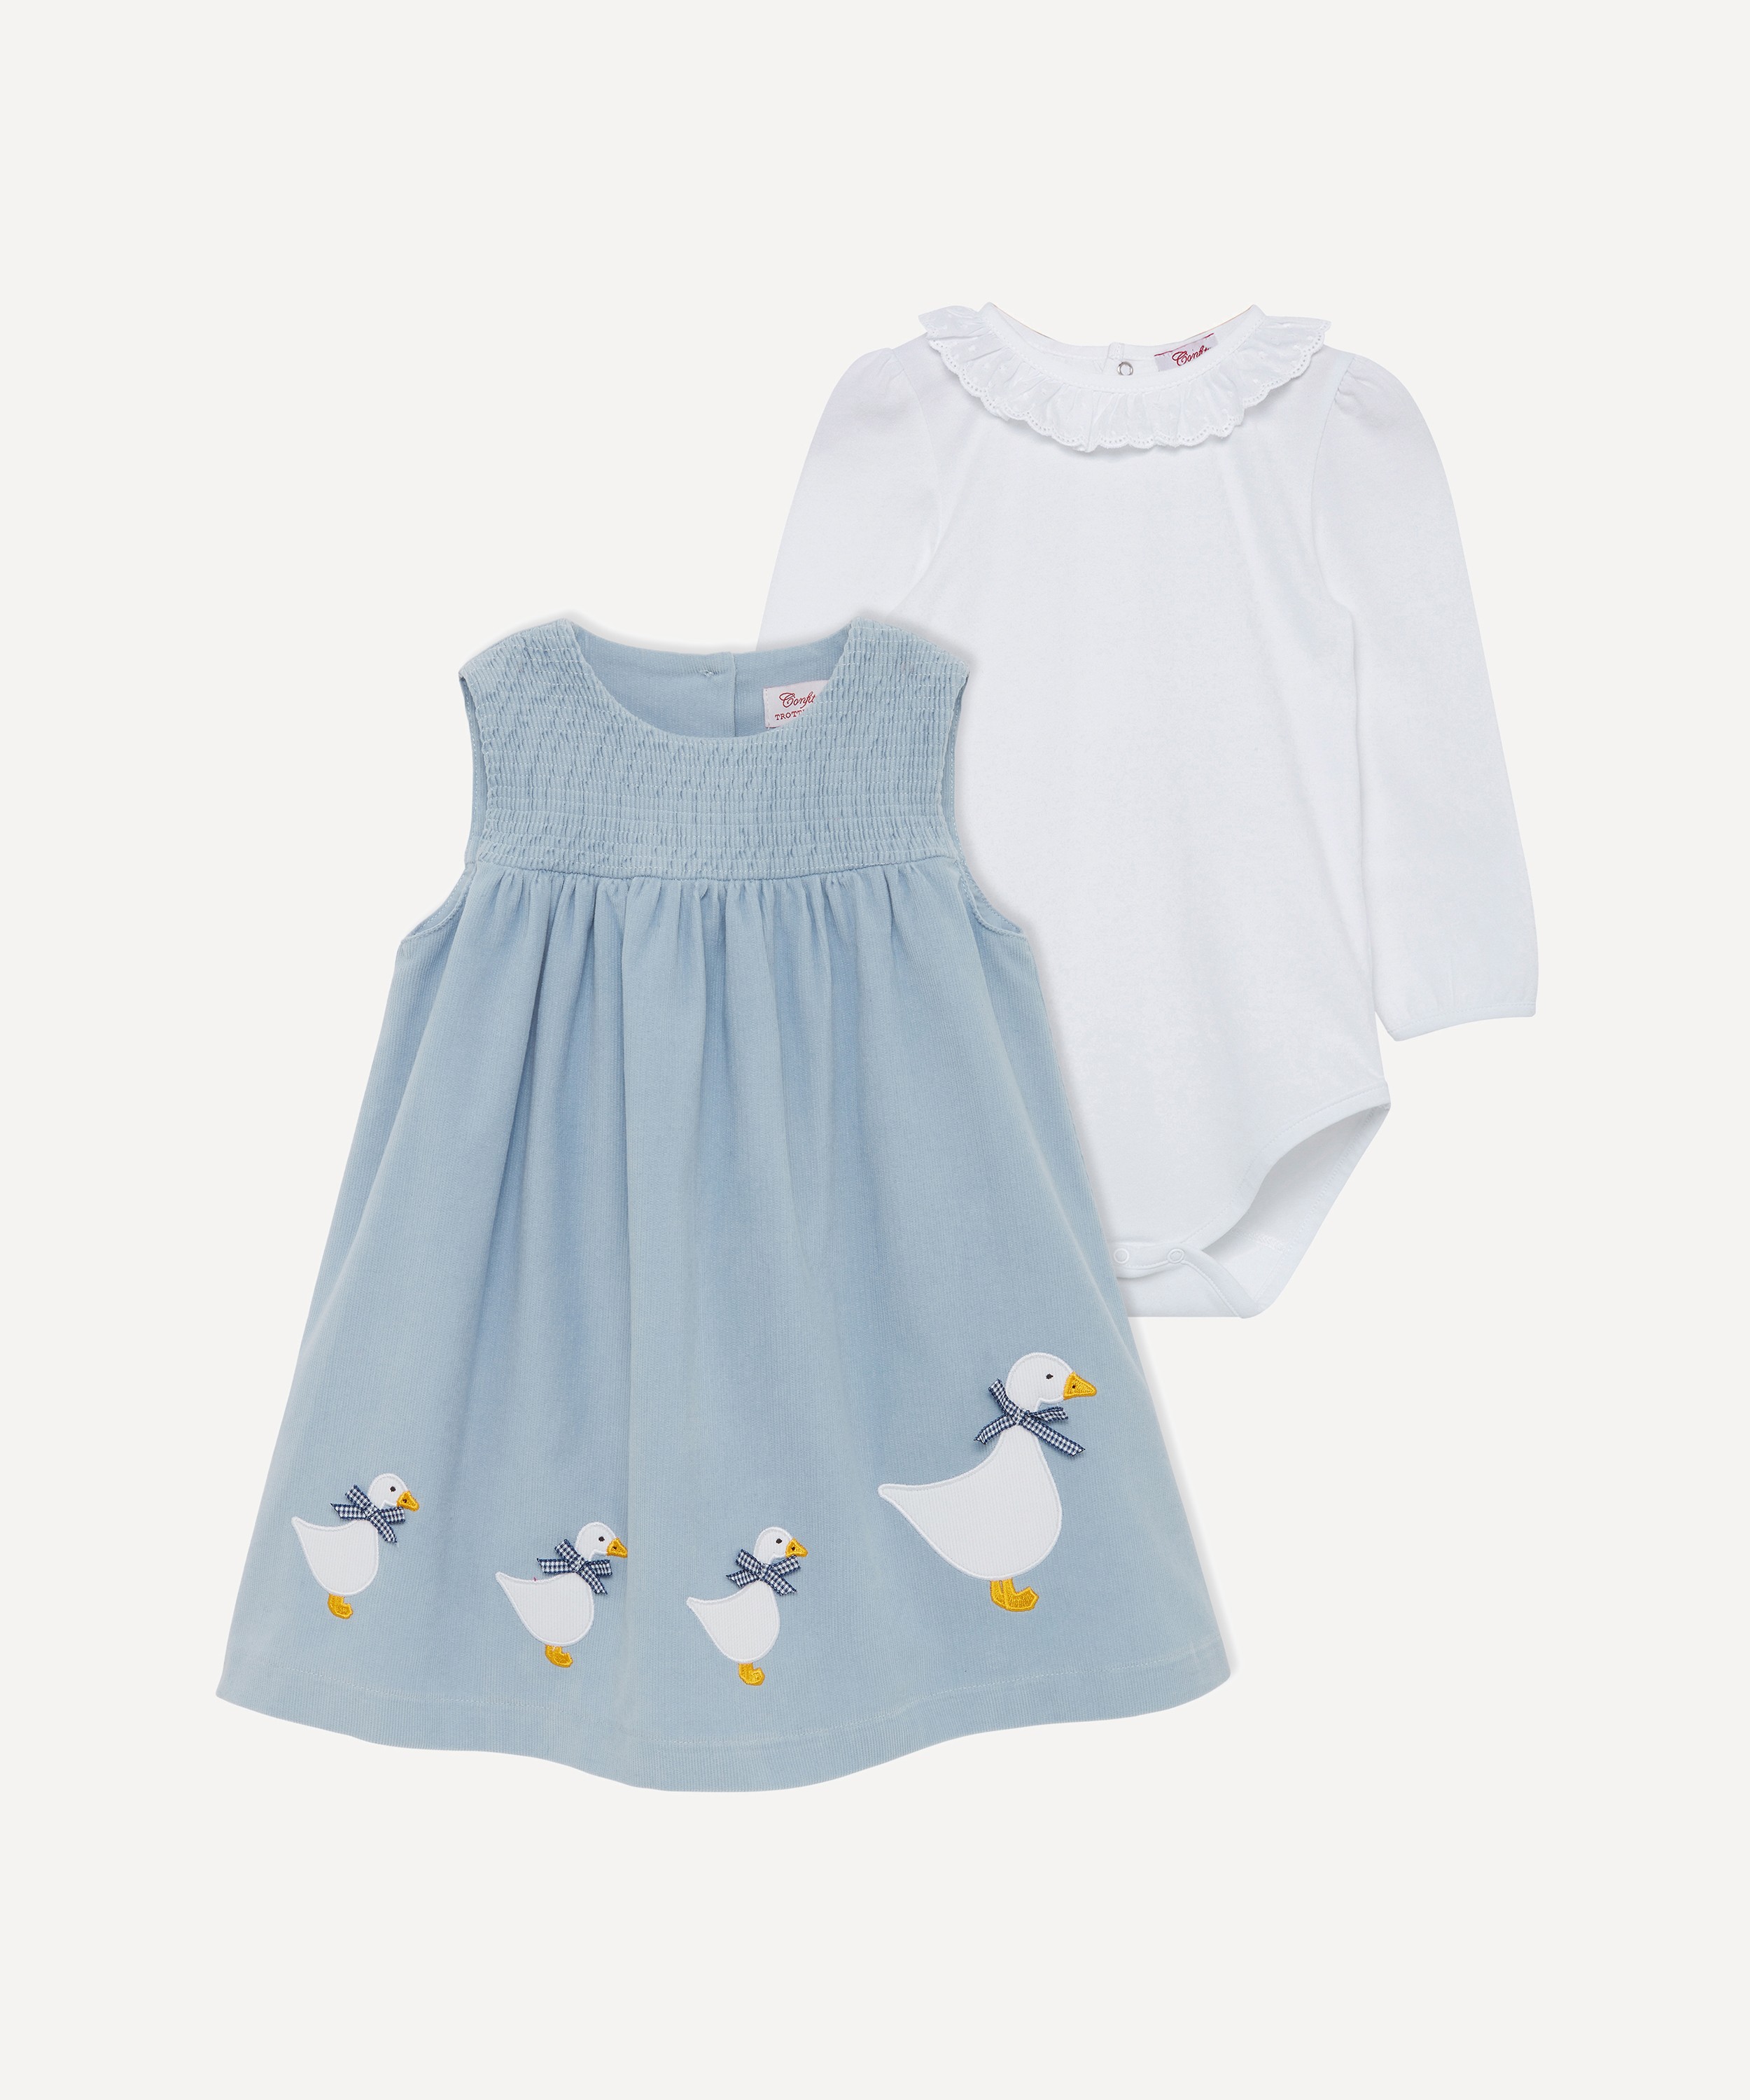 Trotters - Jemima Pinafore Laura Anglaise Body Set 3-24 Months